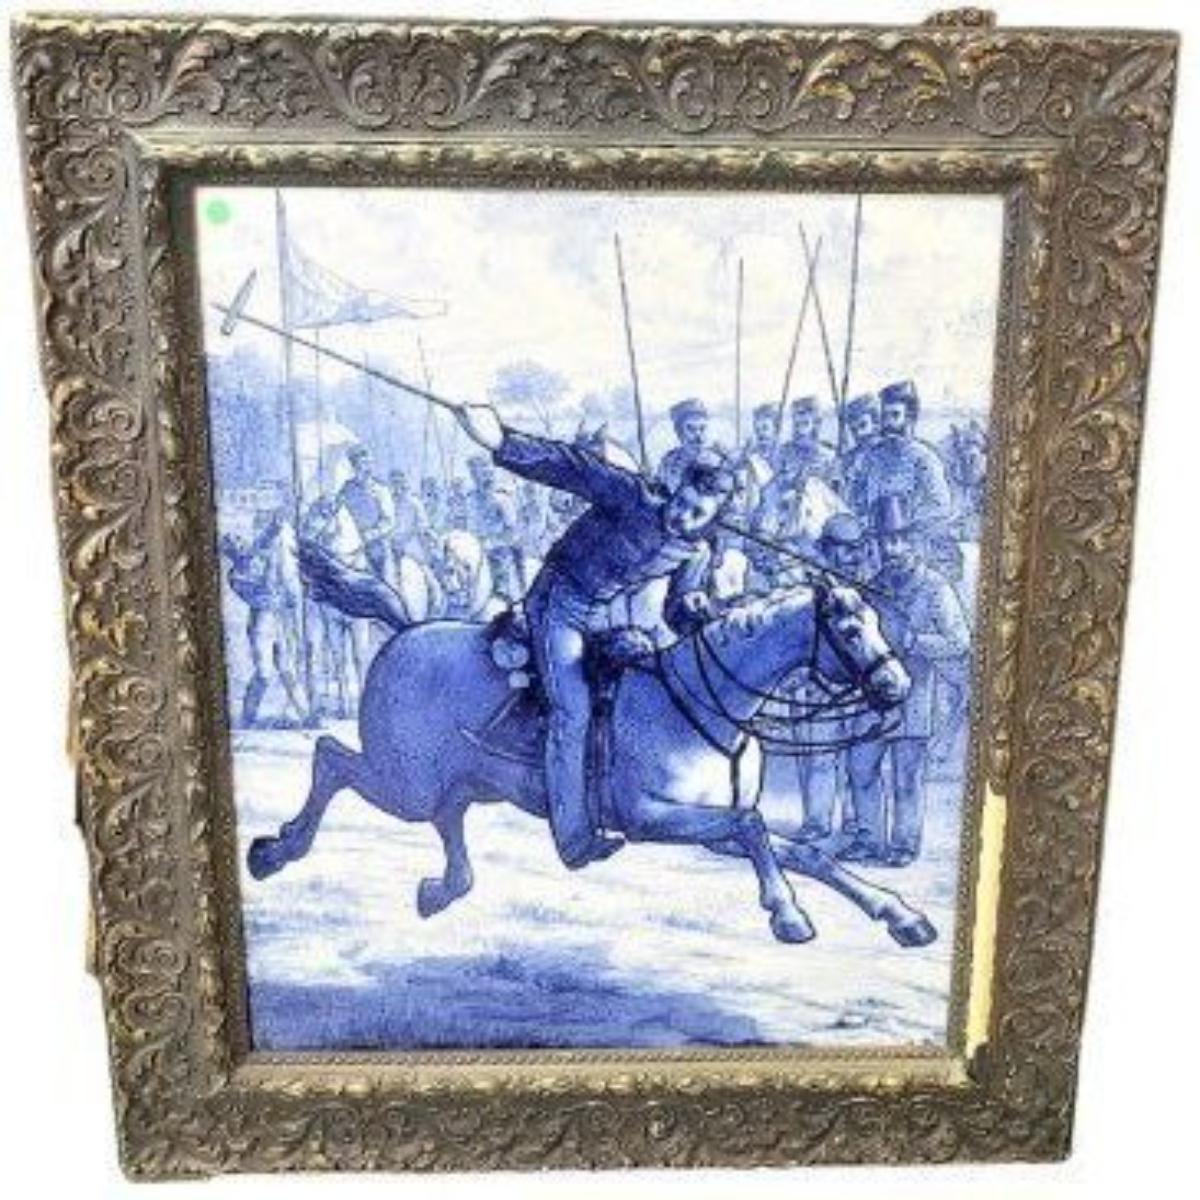 Signed With The Initials 'LB' and Incised With The WTC Copeland monogram. A mounted lancer gallops across the frame displaying the peg that he has uprooted from the ground, while other competitors, amongst them a few spectators, wait their turn in